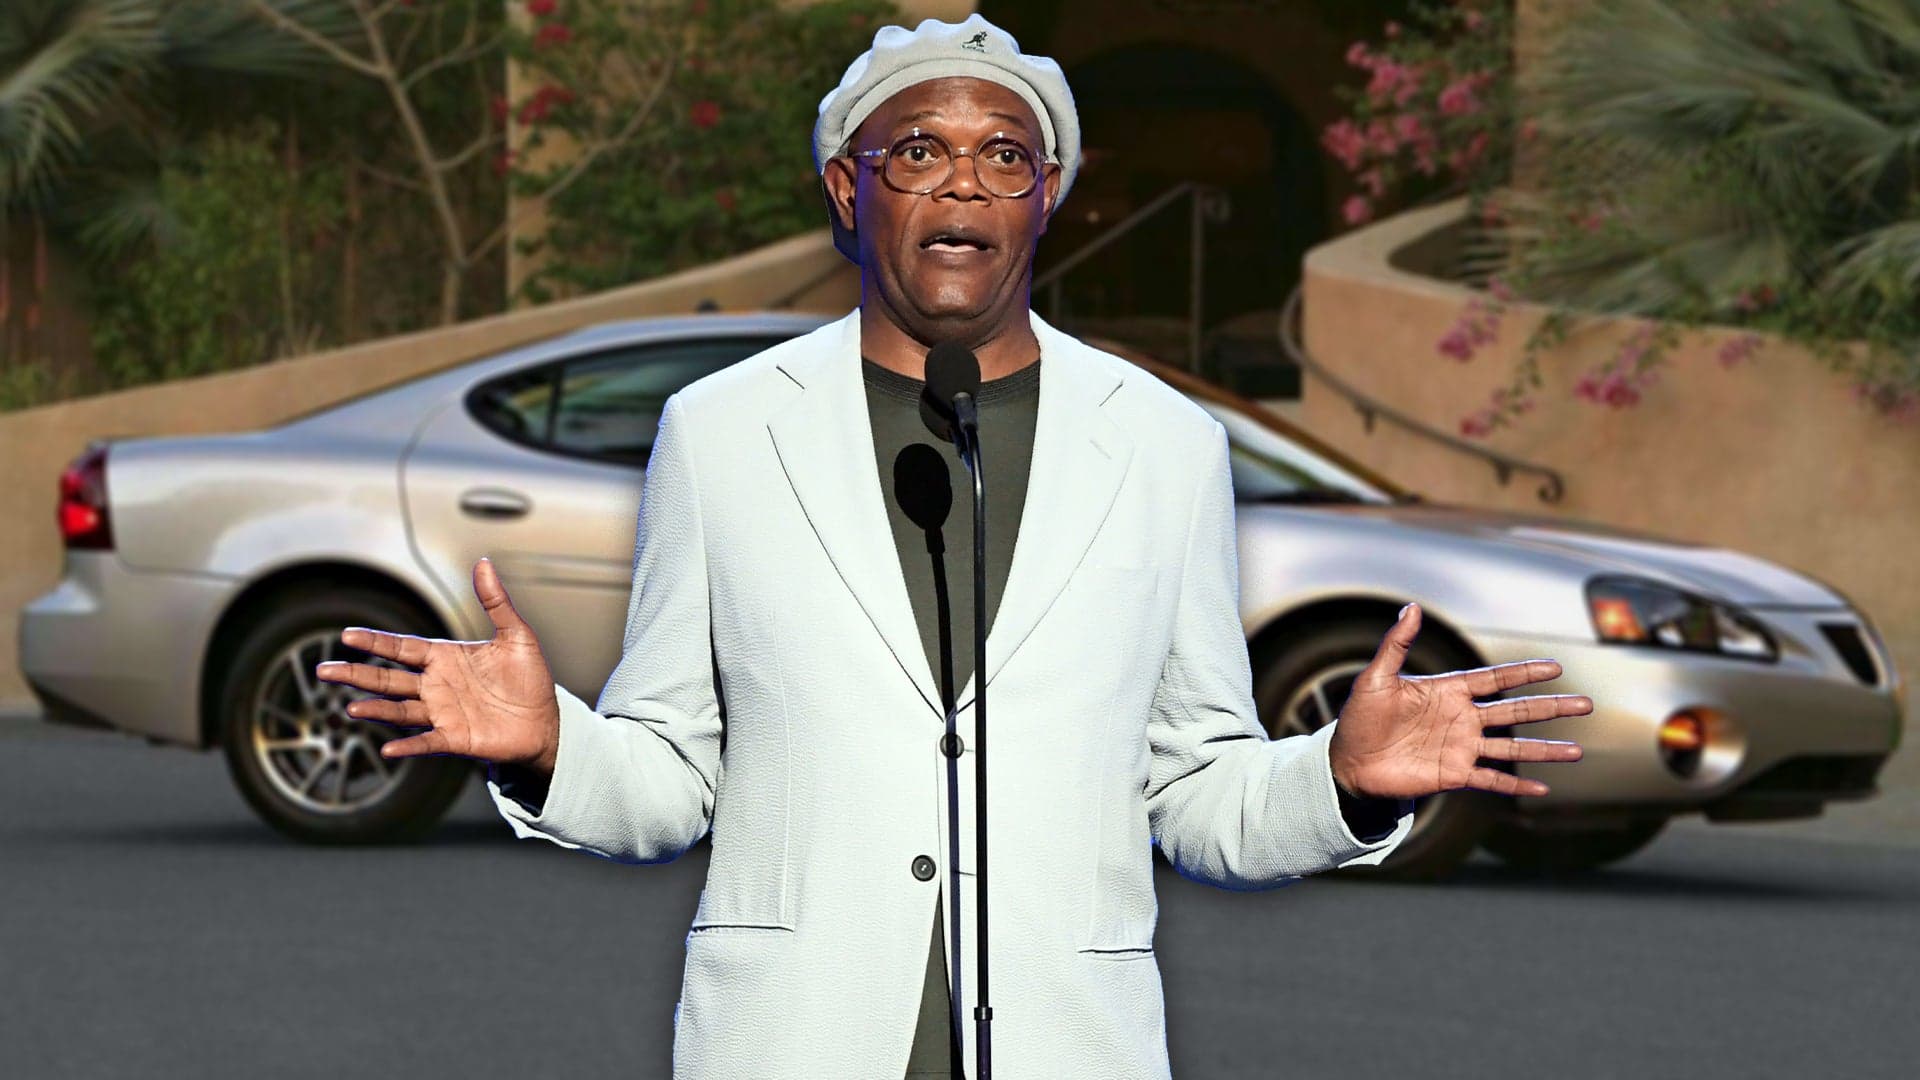 Hear Samuel L. Jackson’s Infamous, Obscenity-Filled 2004 Pontiac Ad Outtake